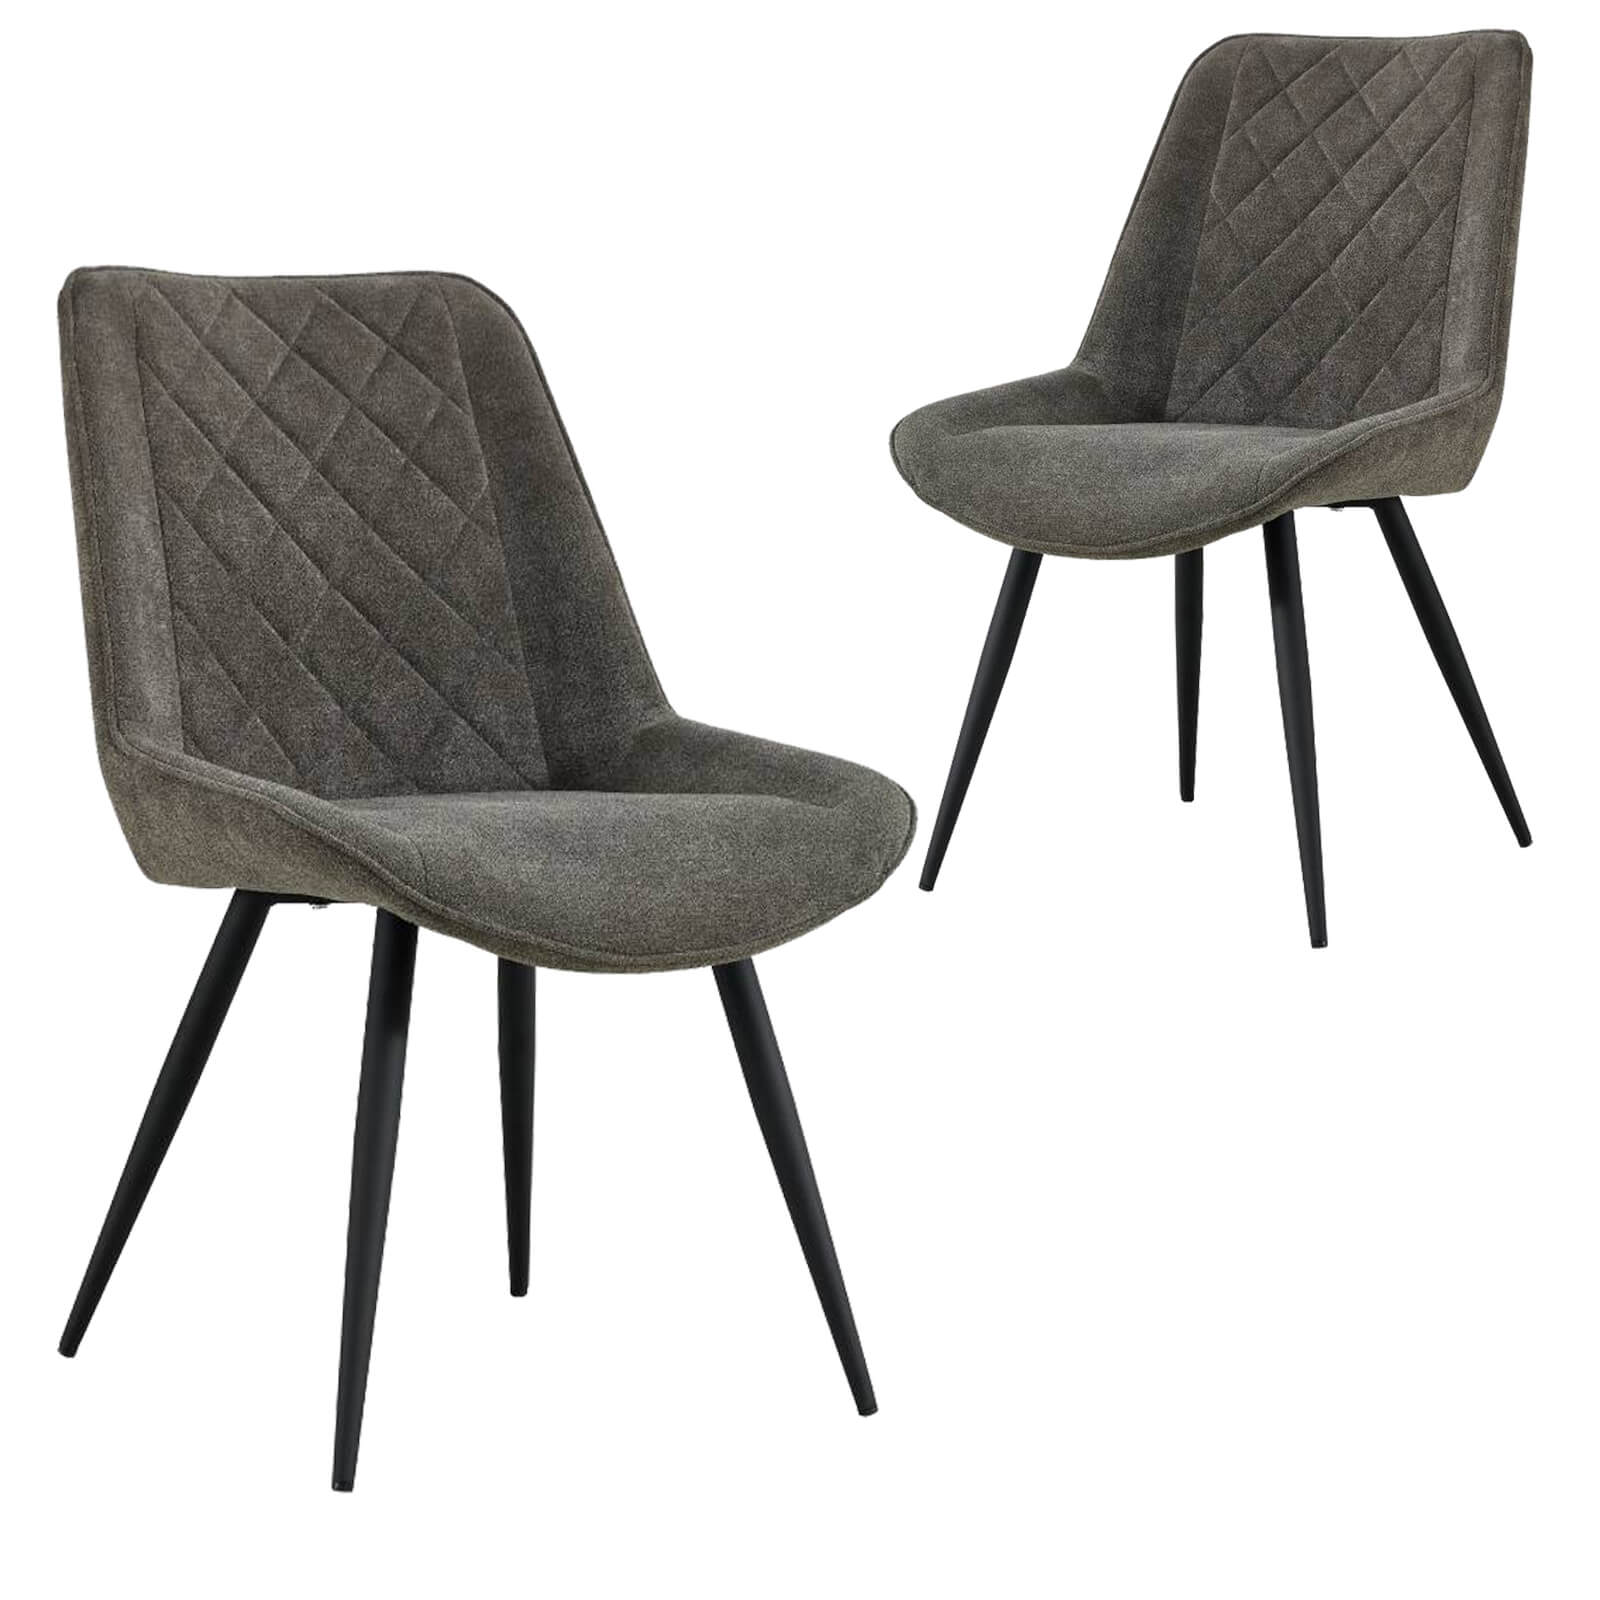 Southbank | Fabric Contemporary Dining Chairs With Arms | Set Of 2 | Graphite